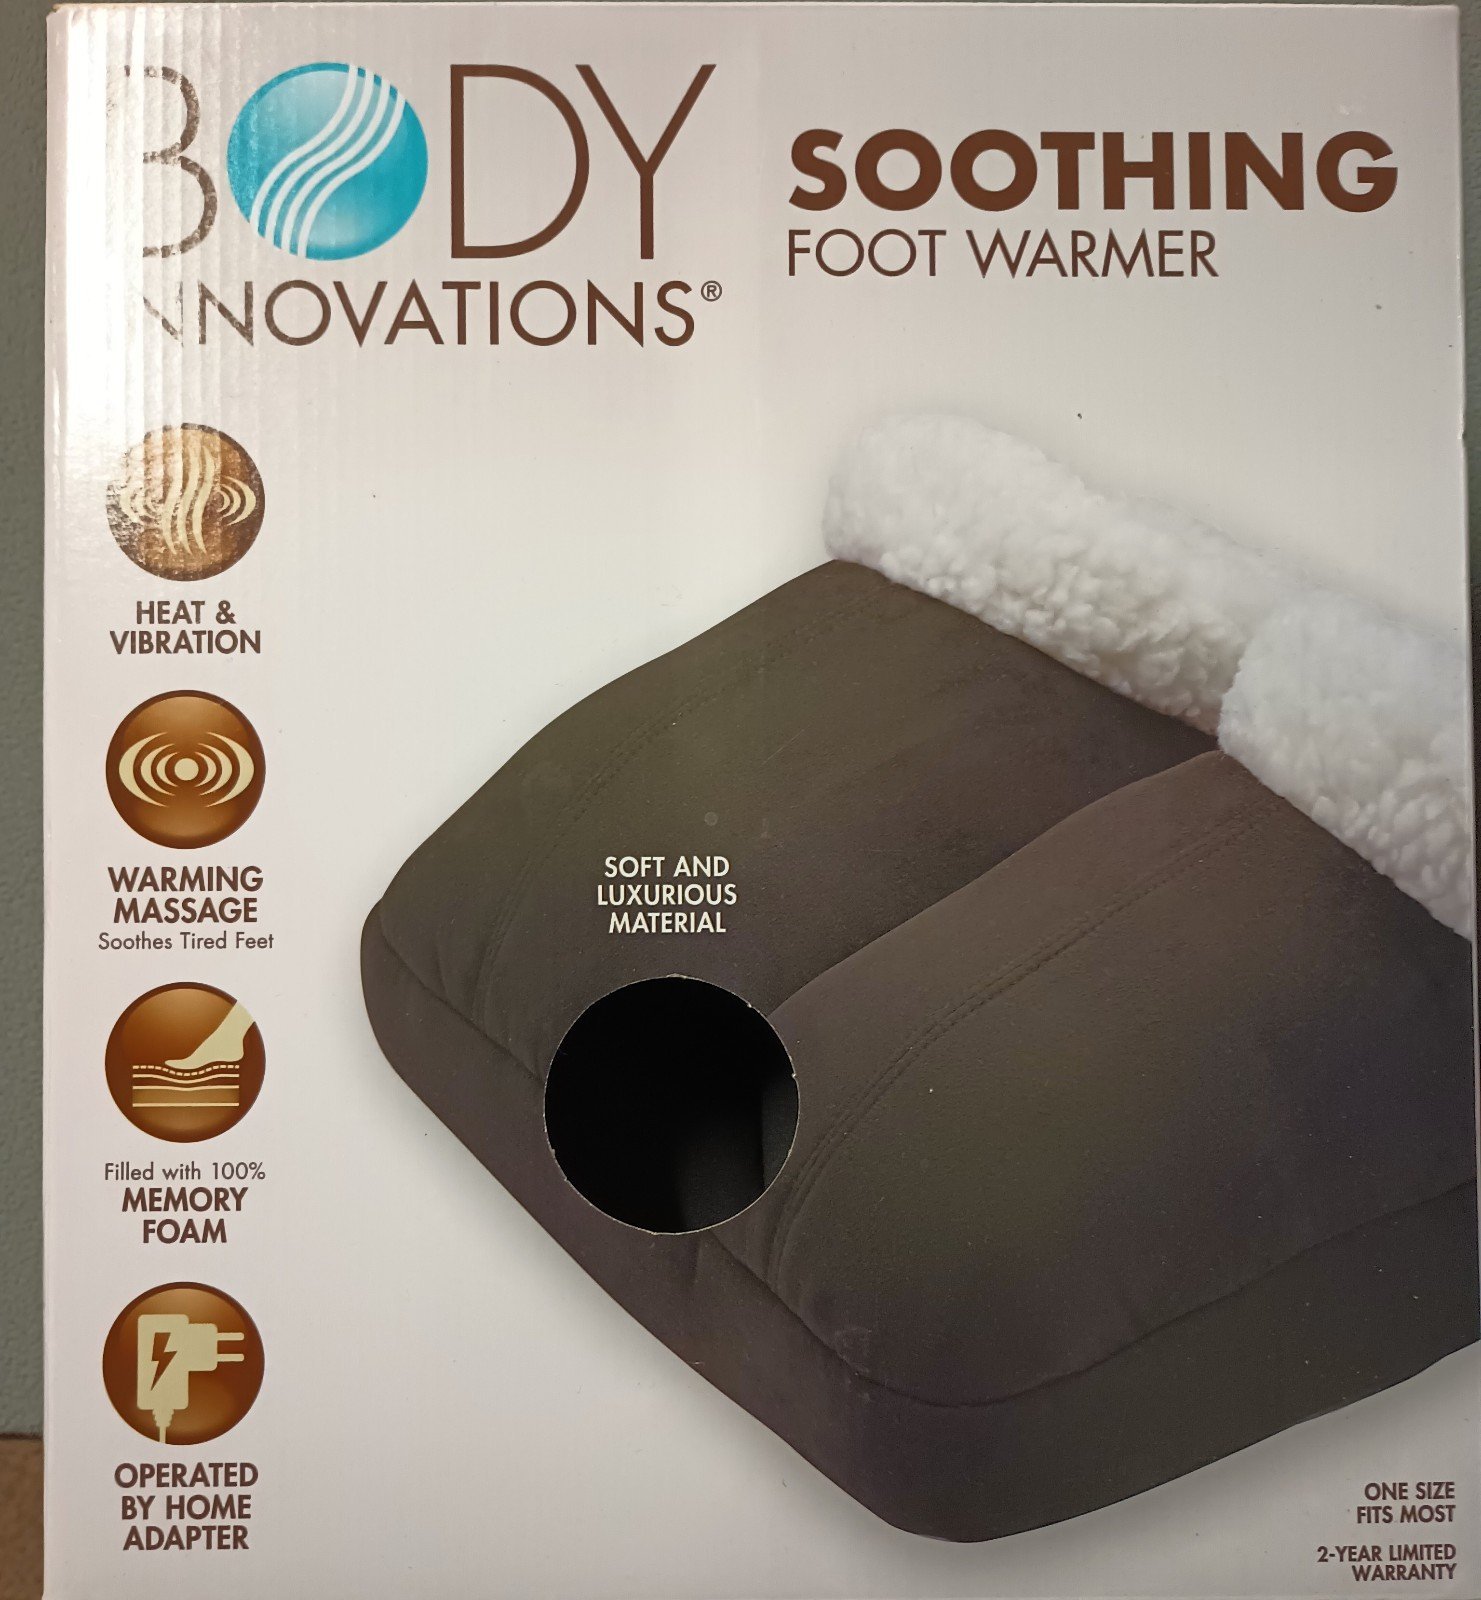 Body Innovations Soothing Foot Warmer Massager with memory foam, black nGOuexxtN